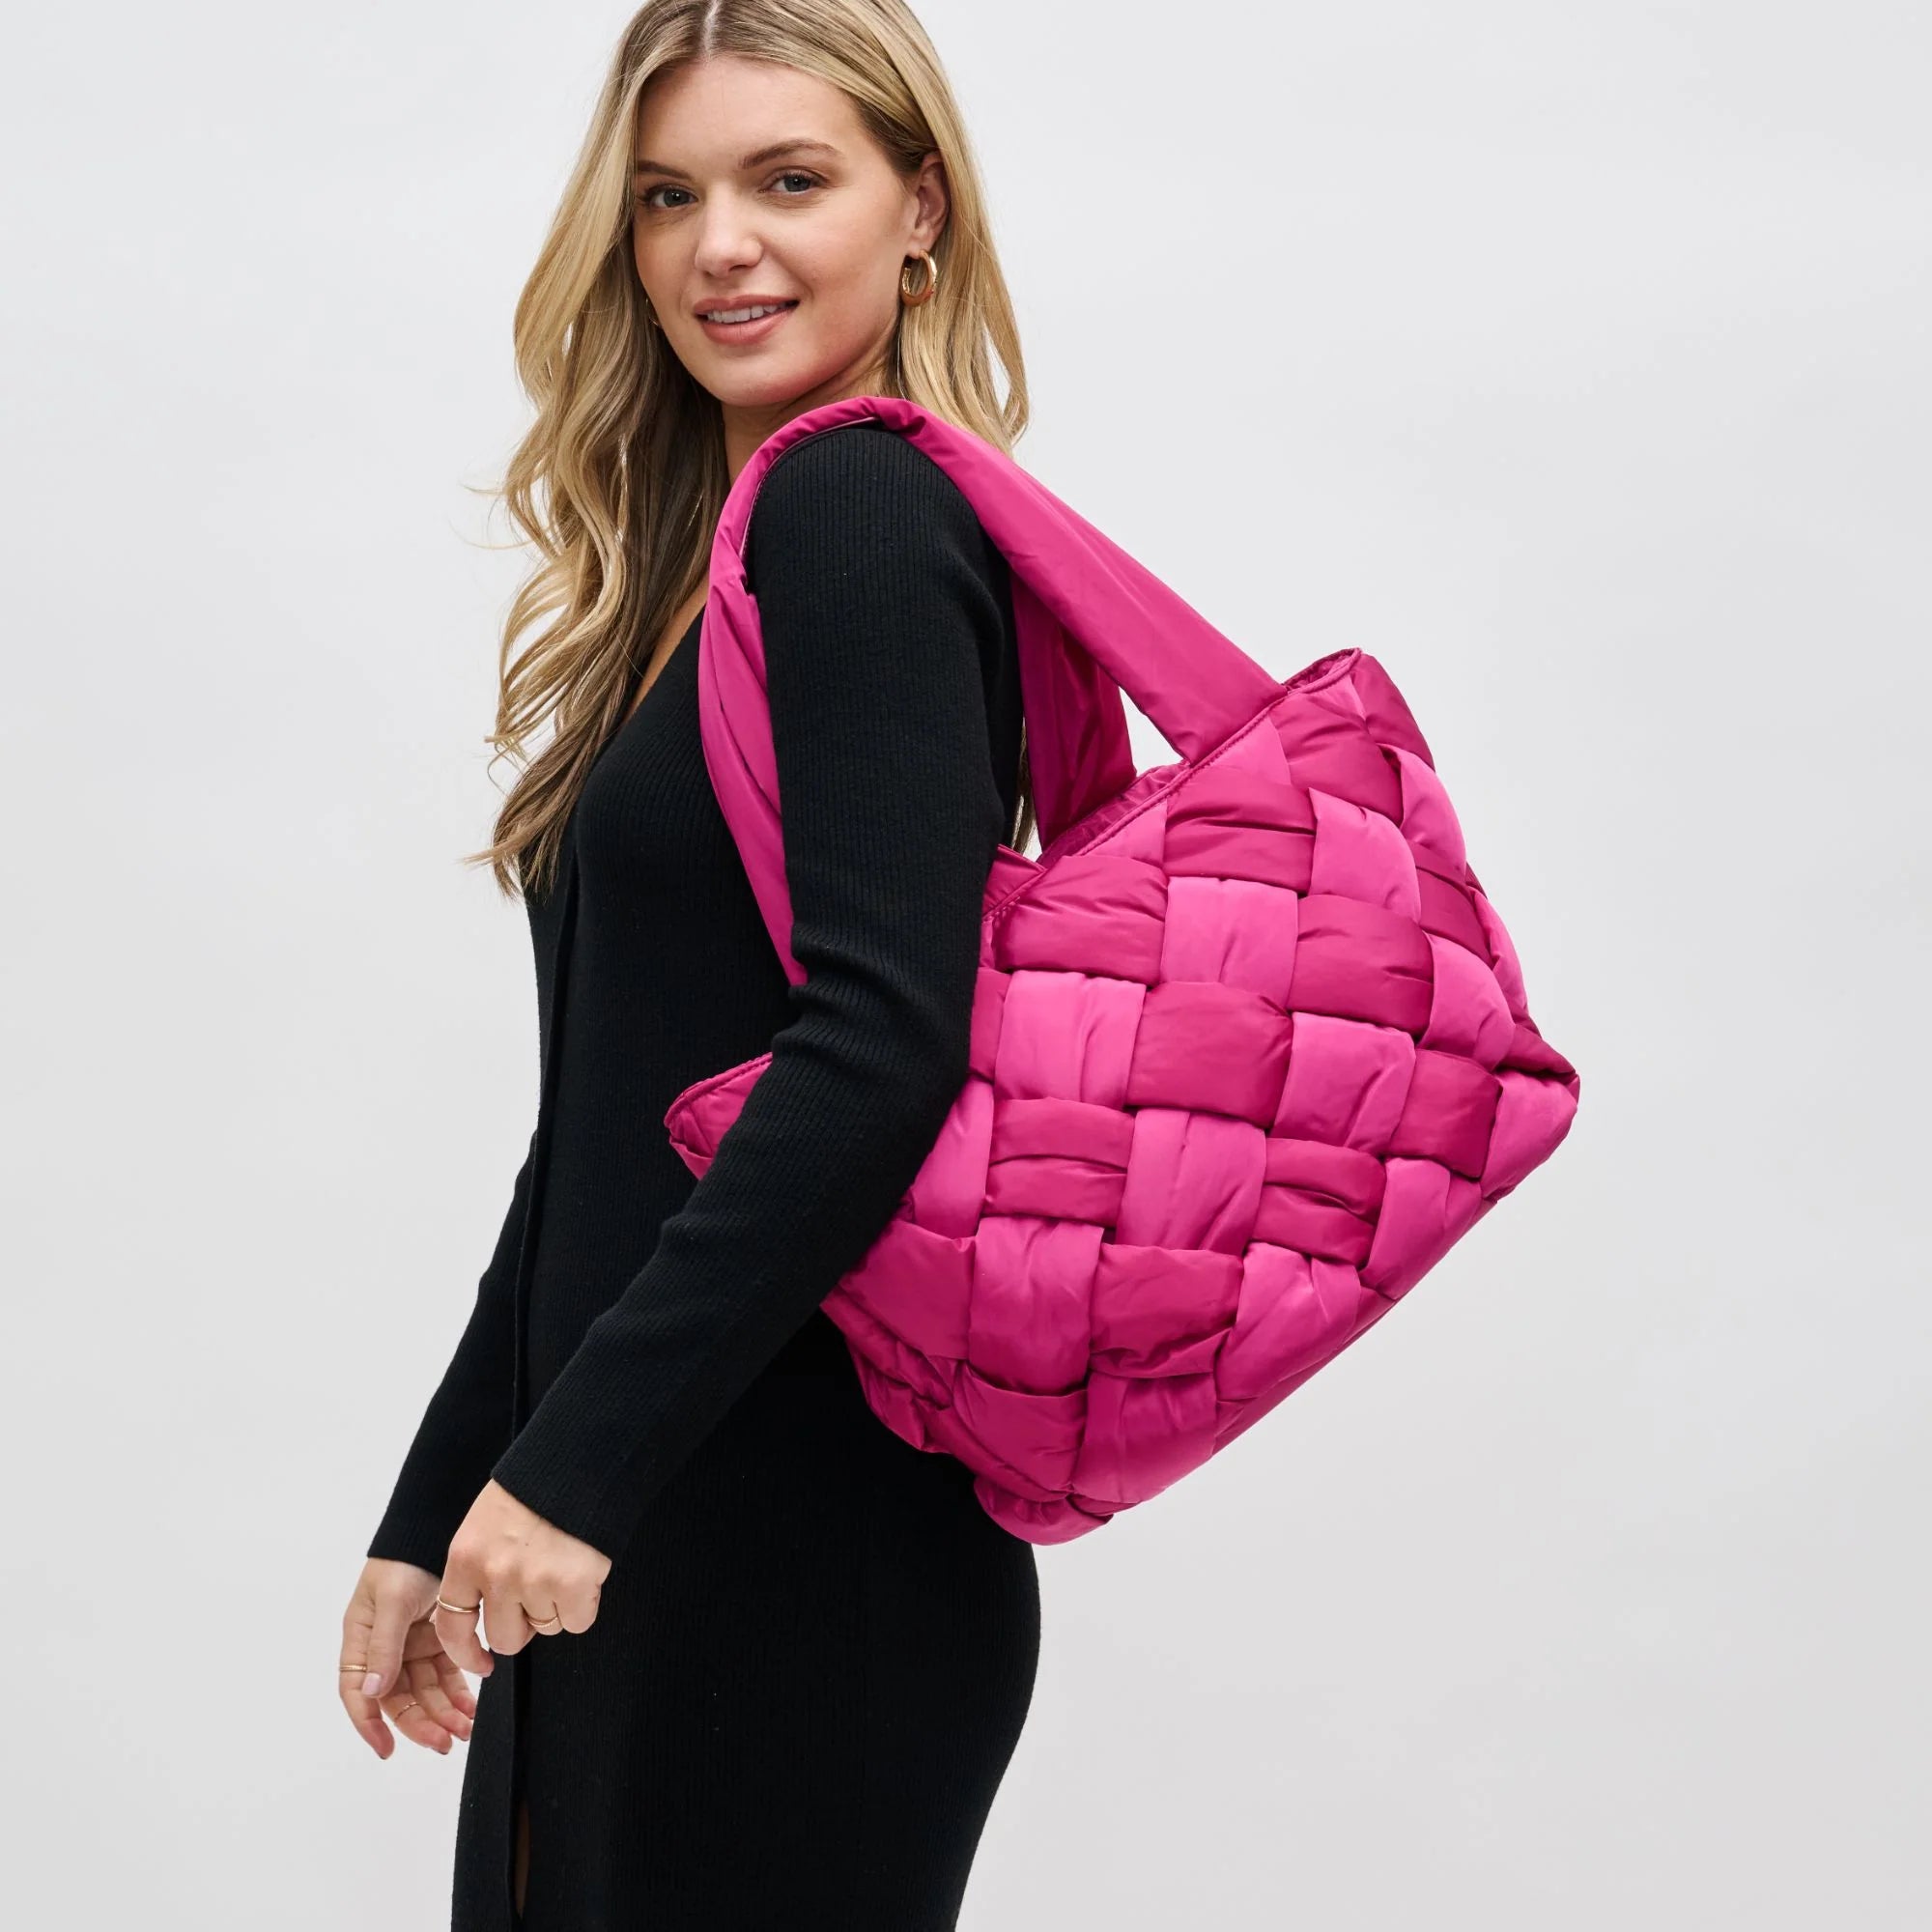 model carrying a pink puffy woven tote